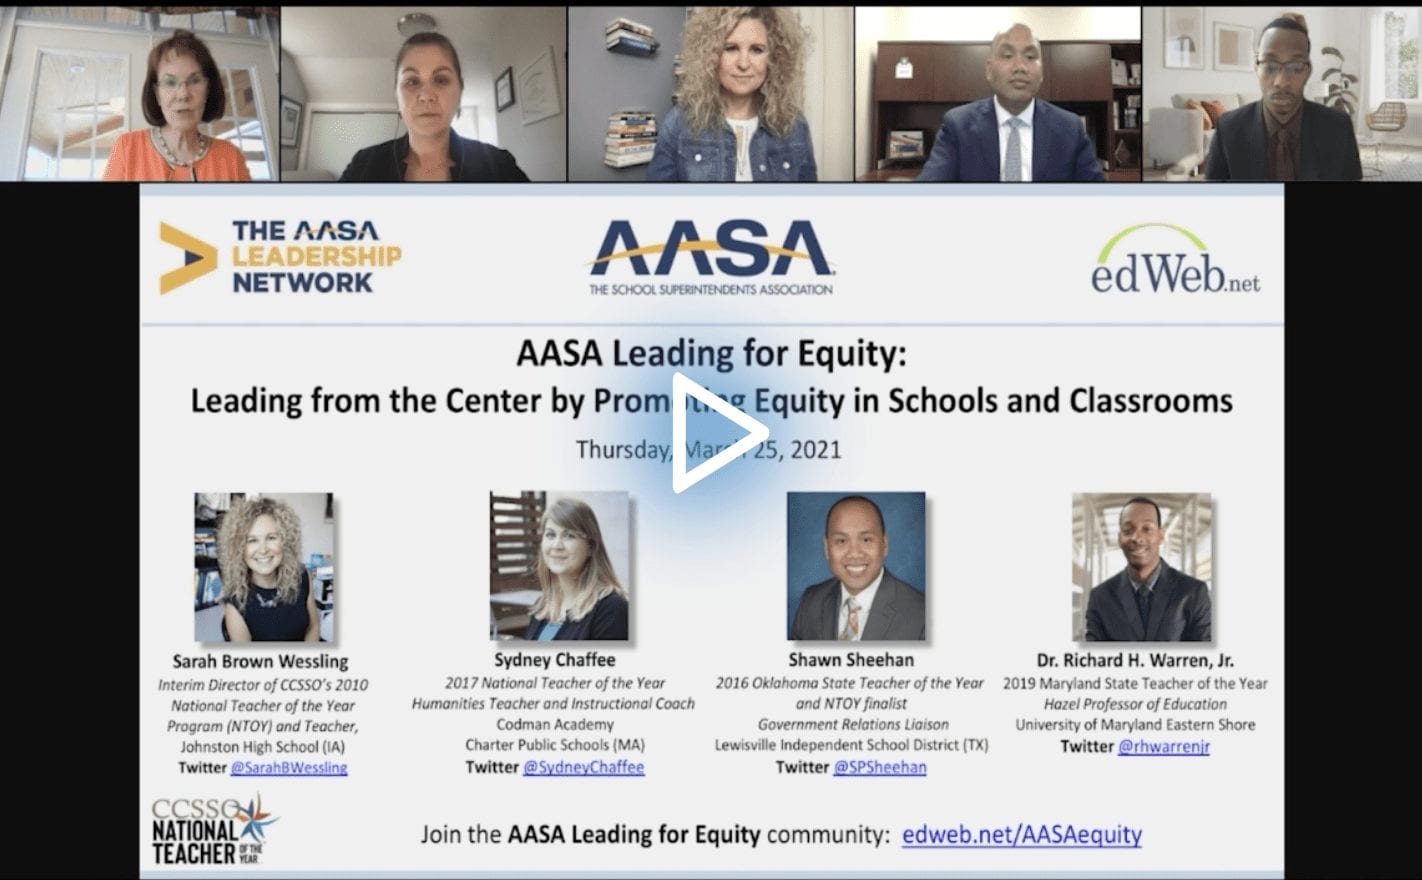 AASA Leading for Equity: Leading from the Center by Promoting Equity in Schools and Classrooms edWebinar recording link